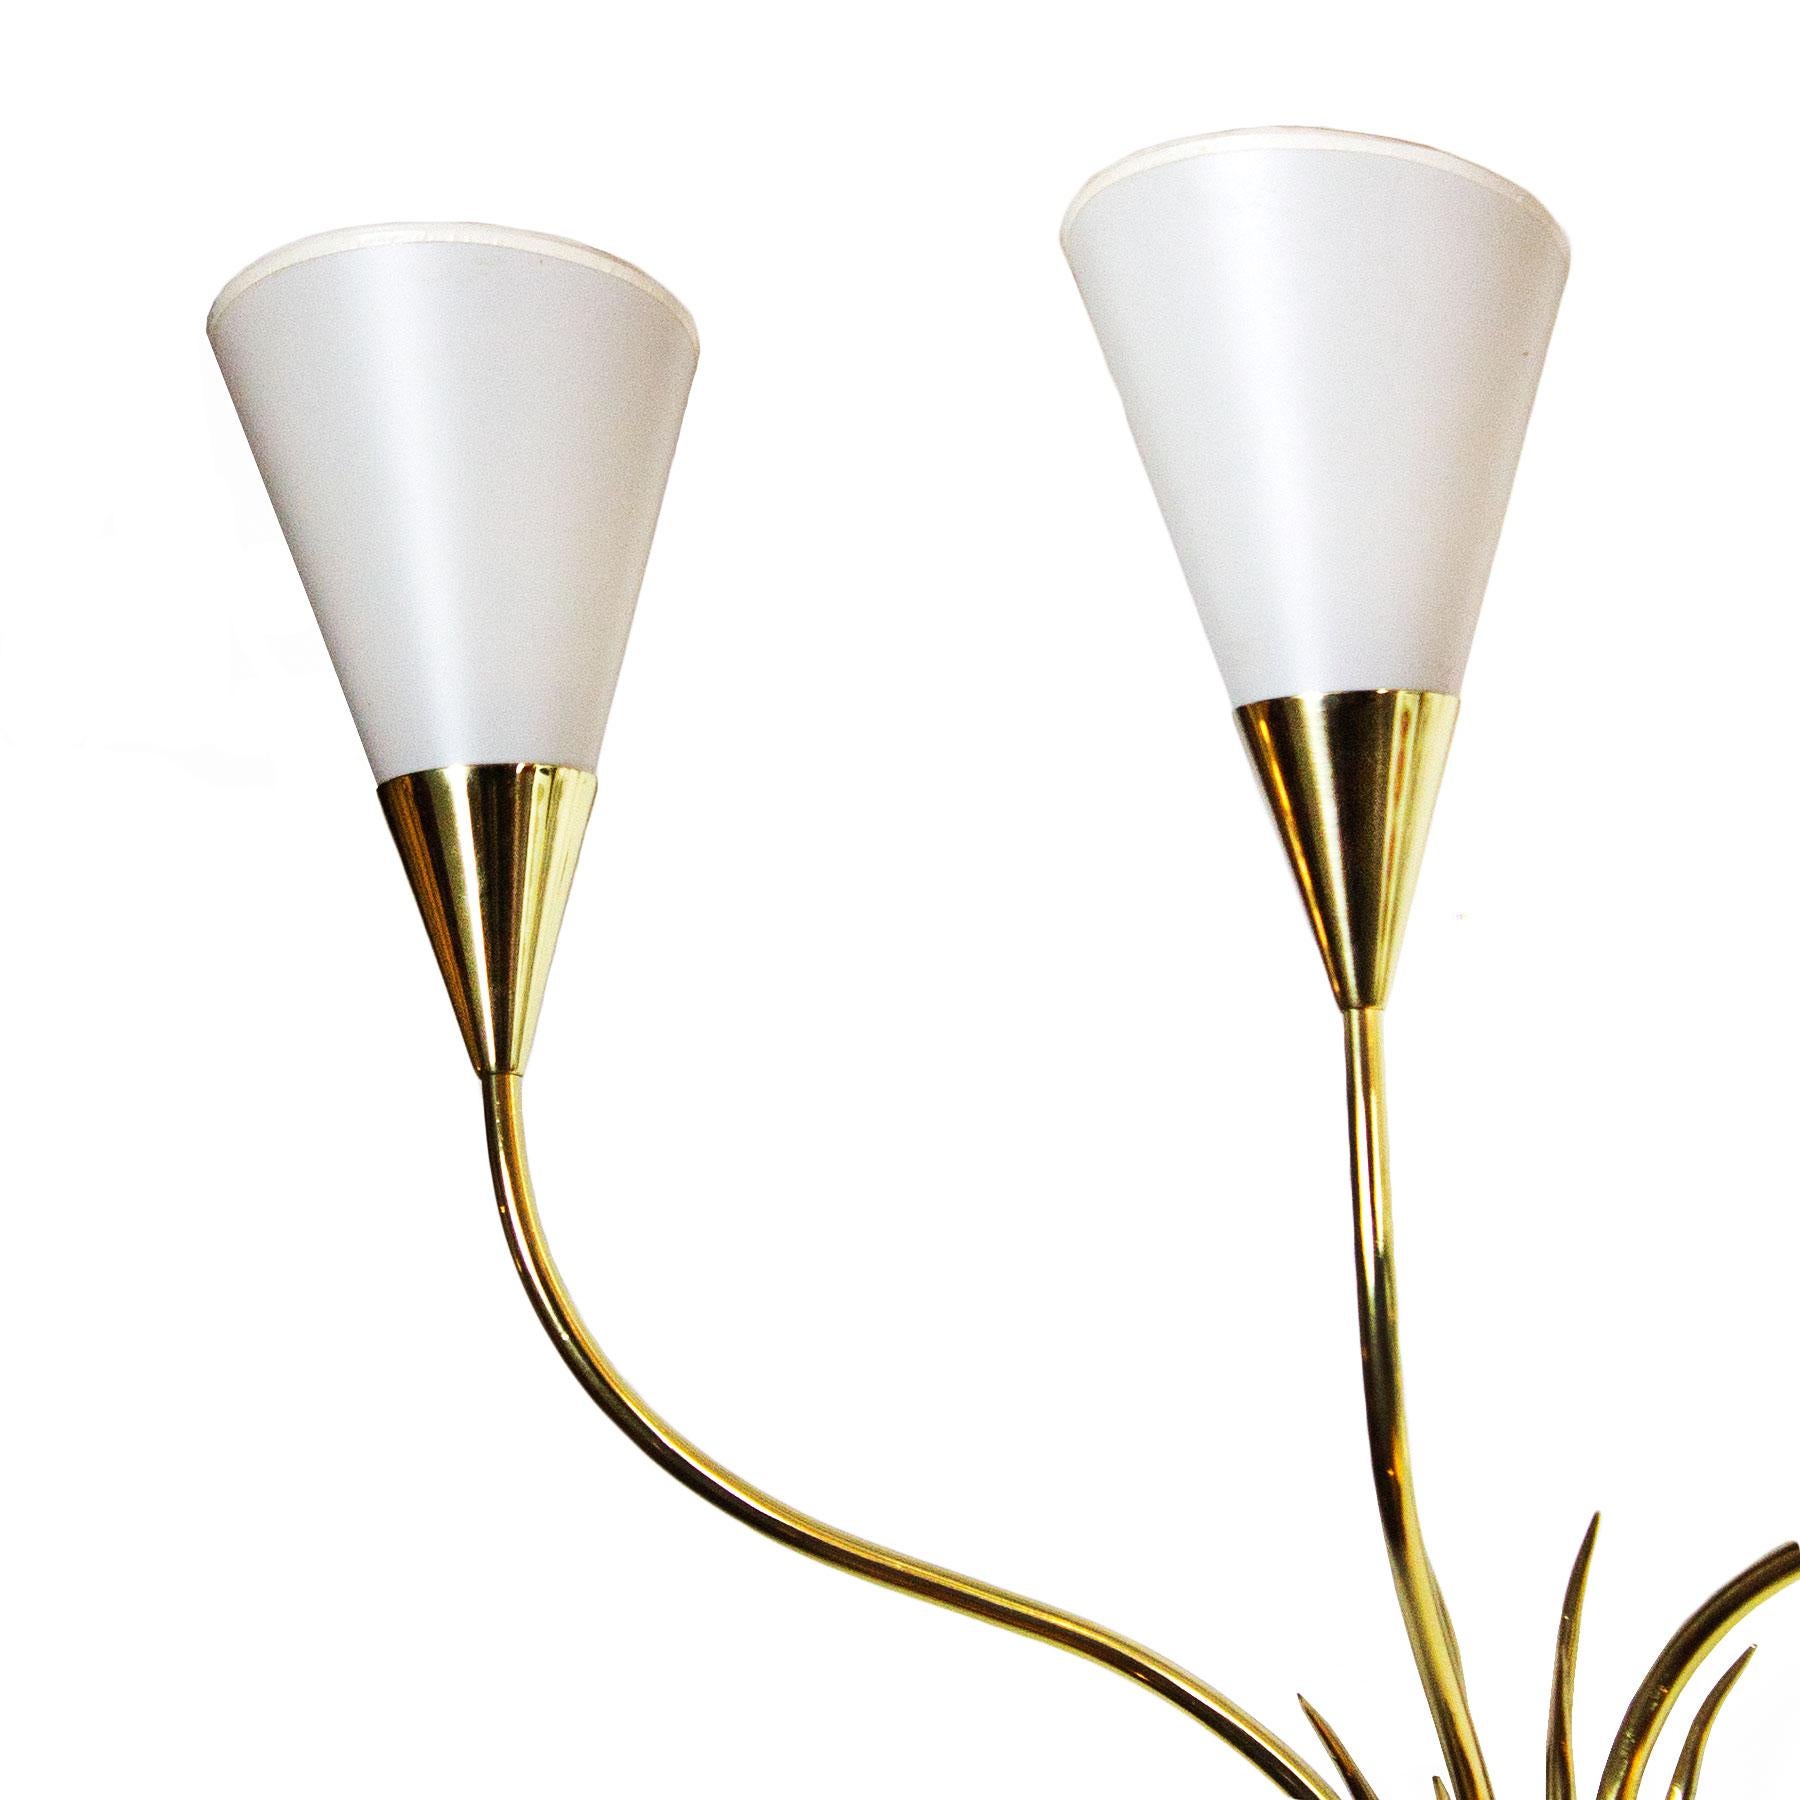 French Pair of Mid-Century Modern Wall Lights With Celluloid Lampshades - France For Sale